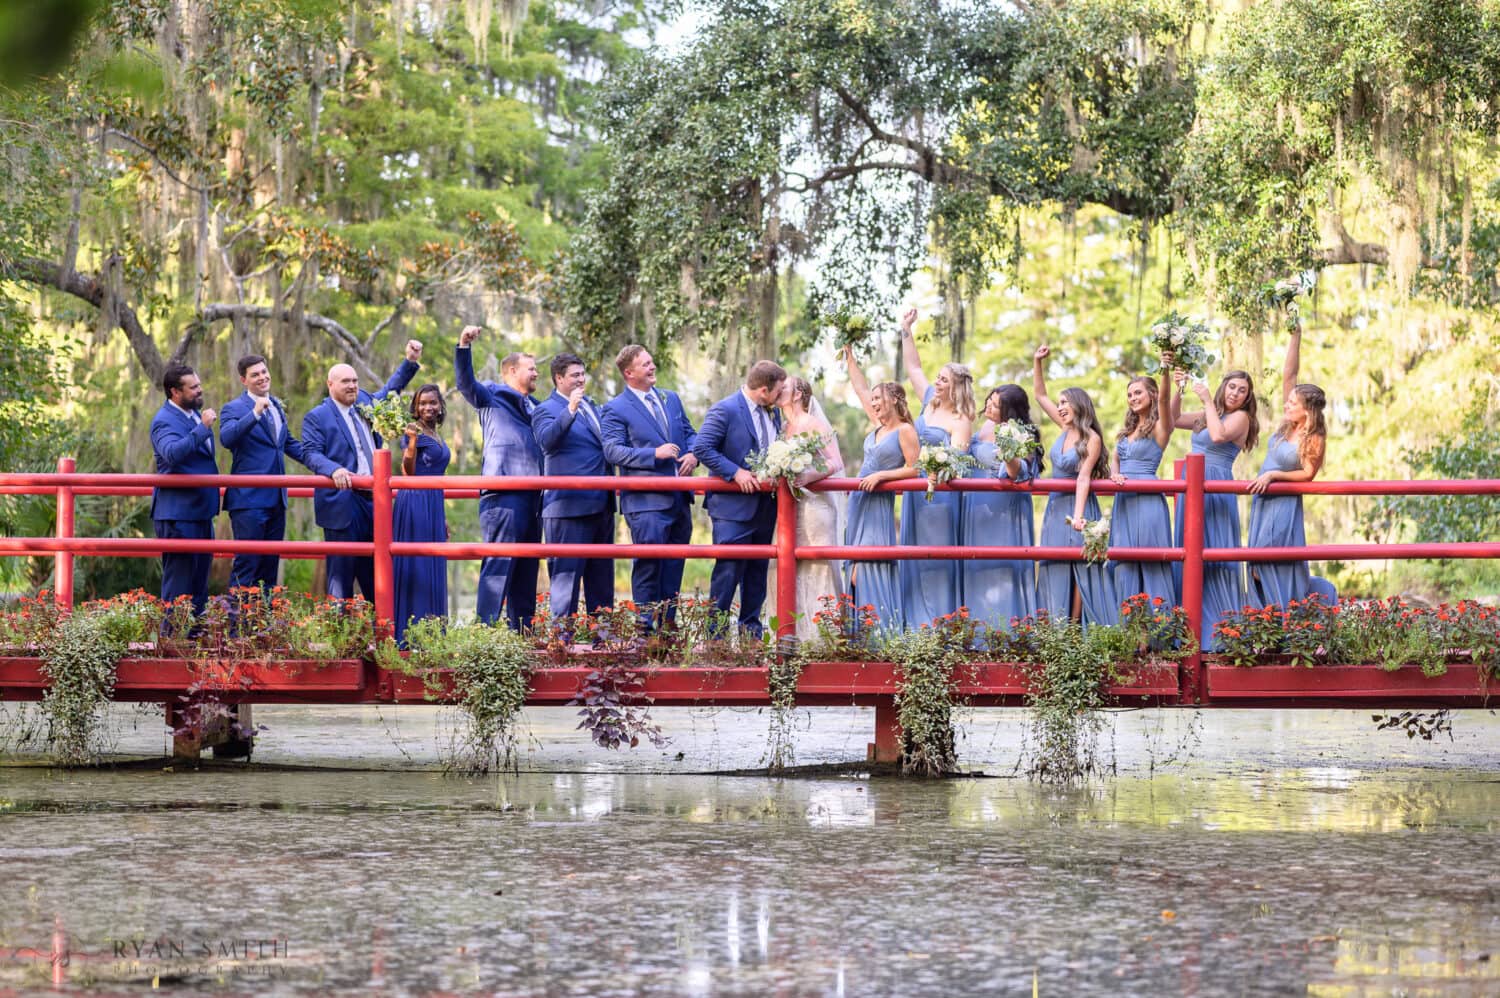 Kiss with bridal party cheering on the red bridge - Magnolia Plantation